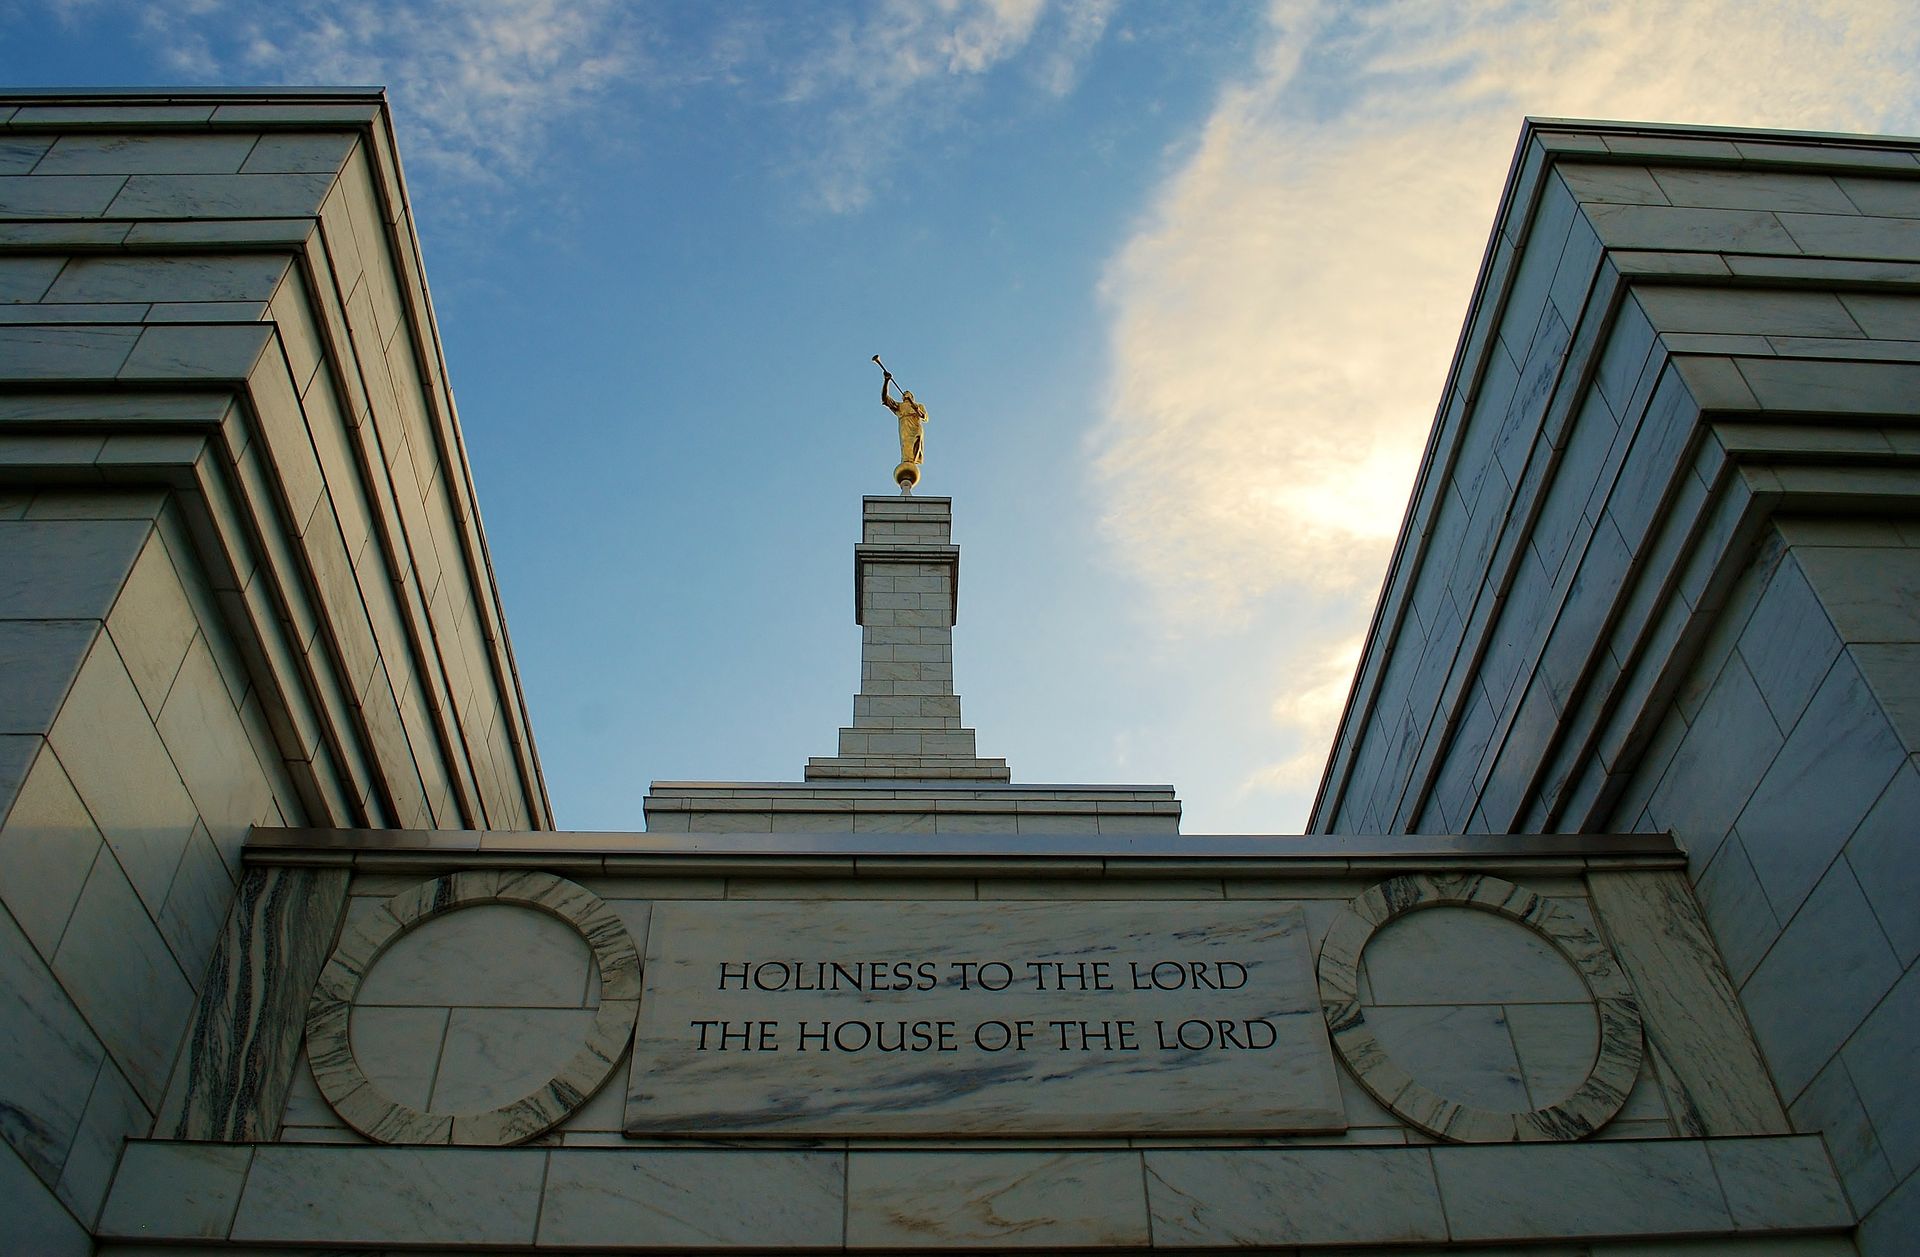 The Columbus Ohio Temple has the inscription “Holiness to the Lord: The House of the Lord.”